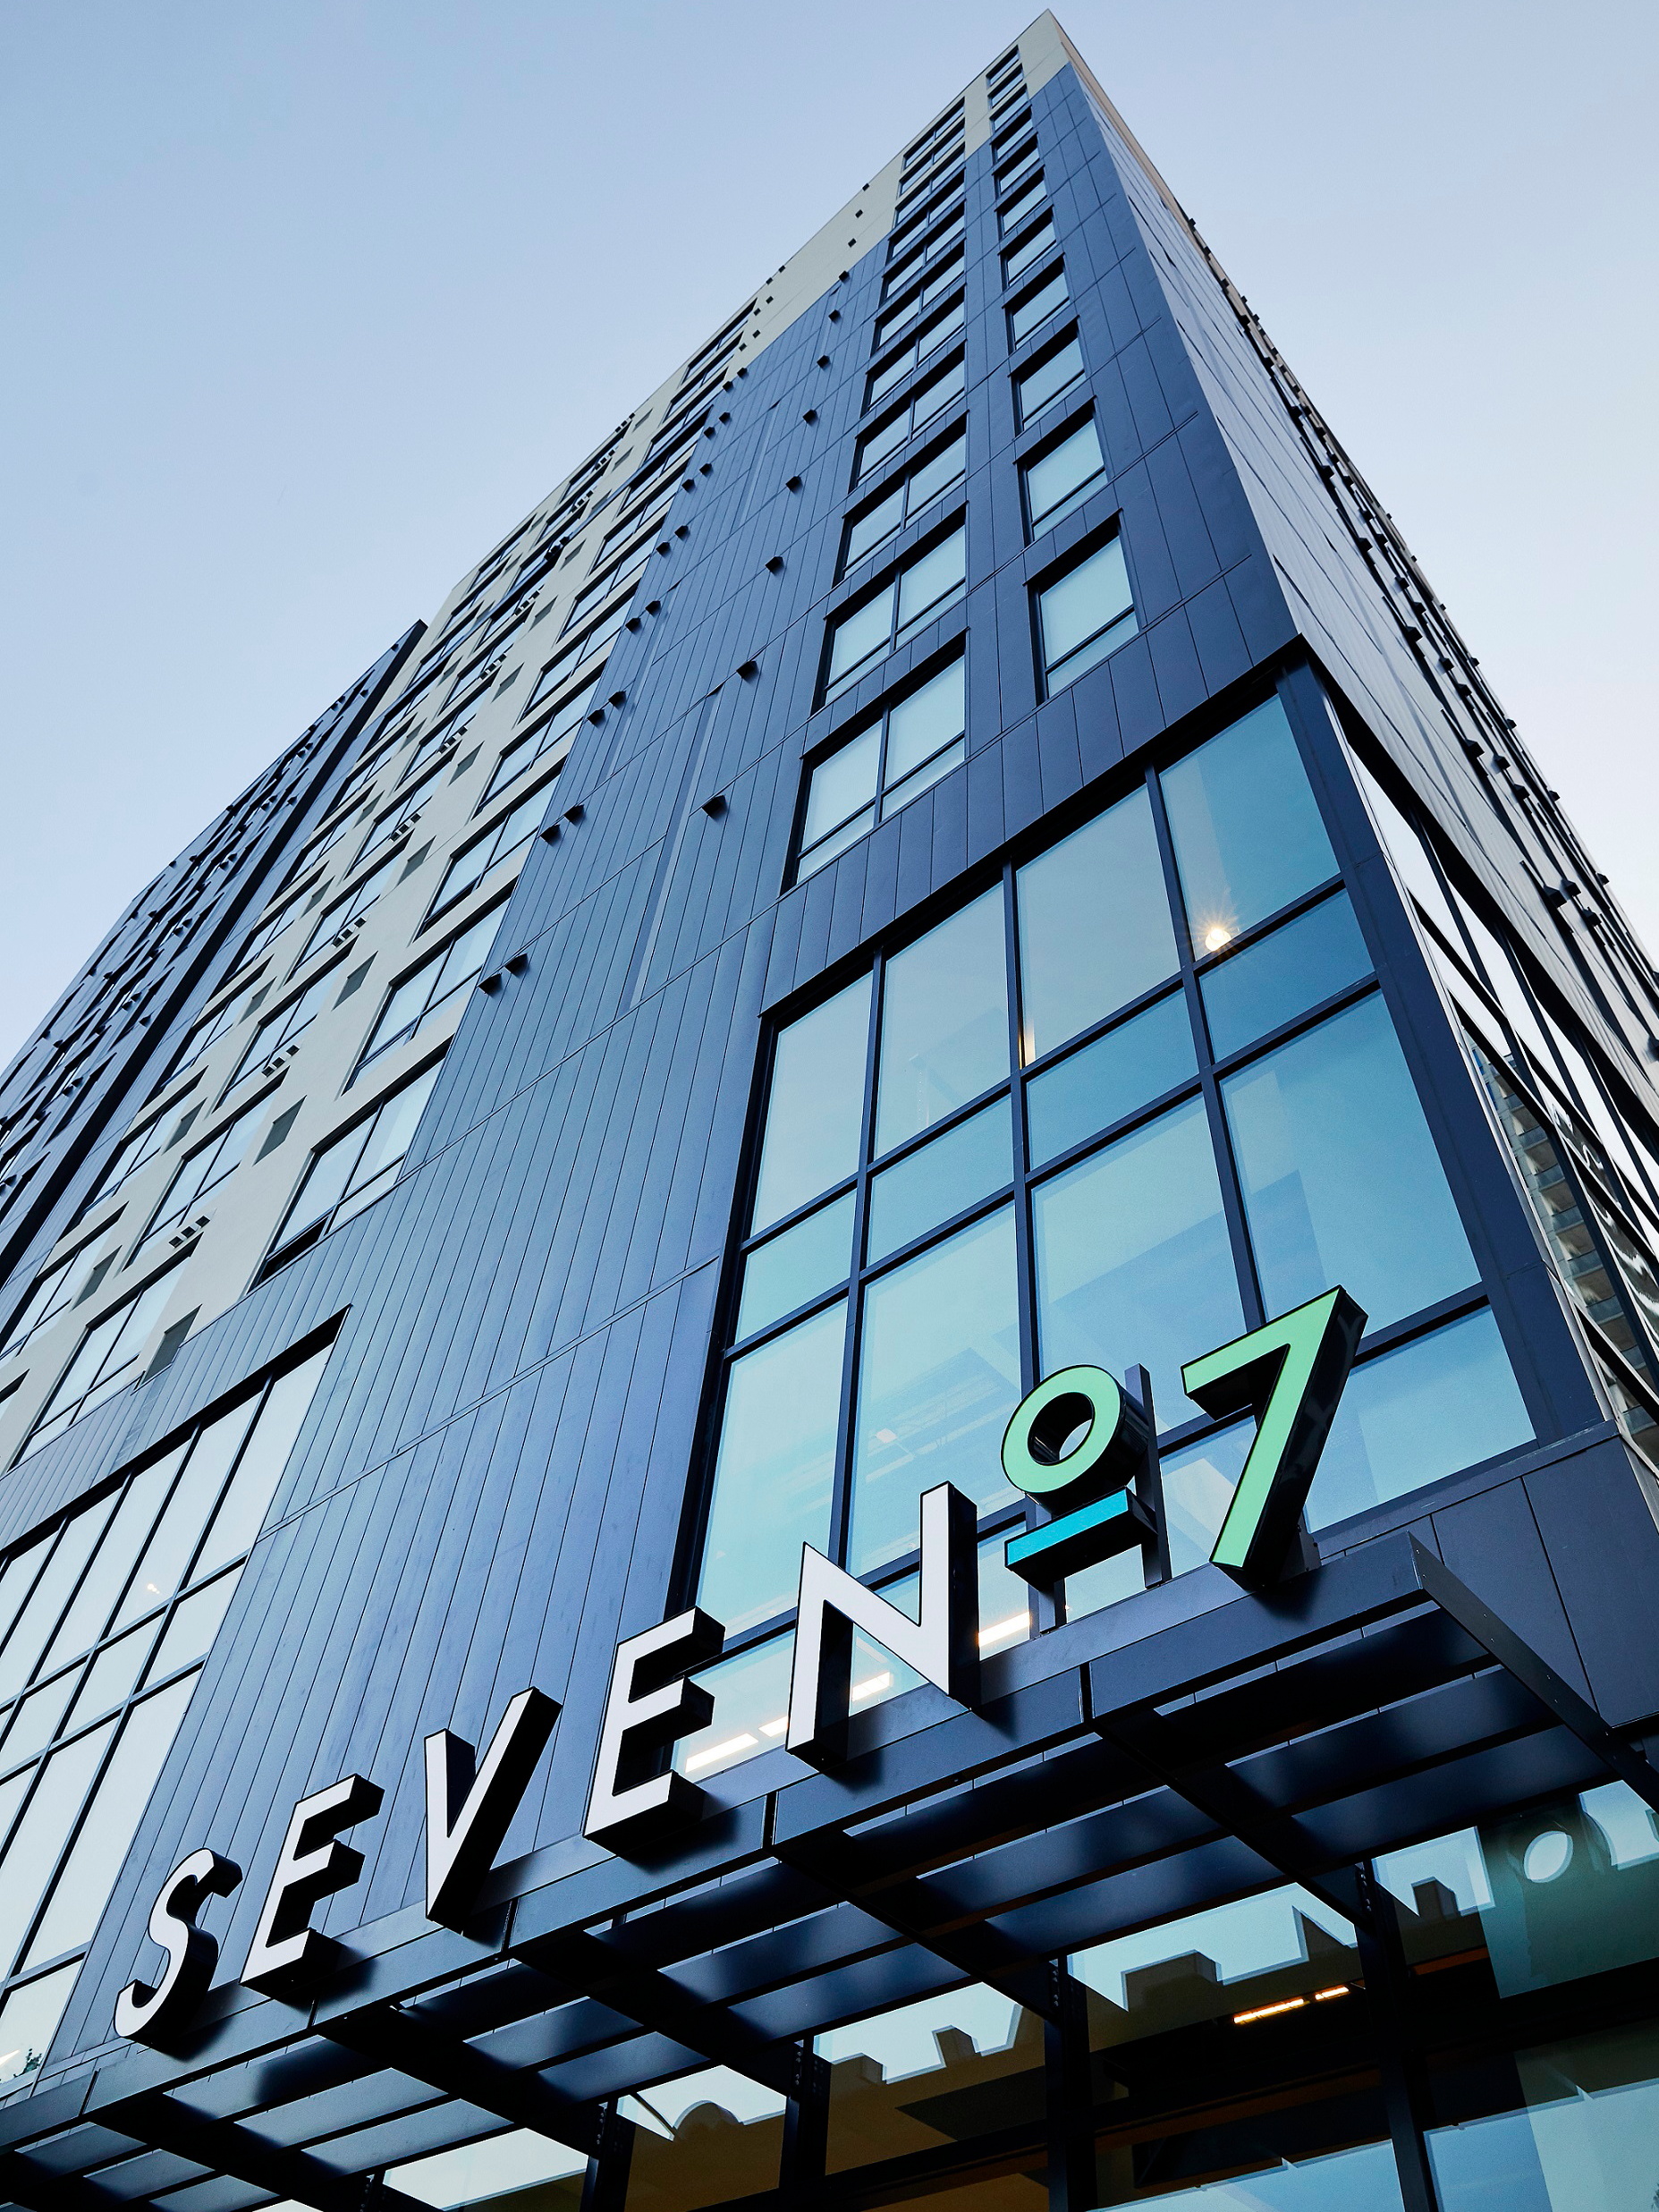 Ascott Residence Trust (ART) has unveiled plans to acquire the freehold of a 548-bed student accommodation asset named Seven07 in Champaign, Illinois, USA for US$83.25 million (S$112.4 million). Click to enlarge.